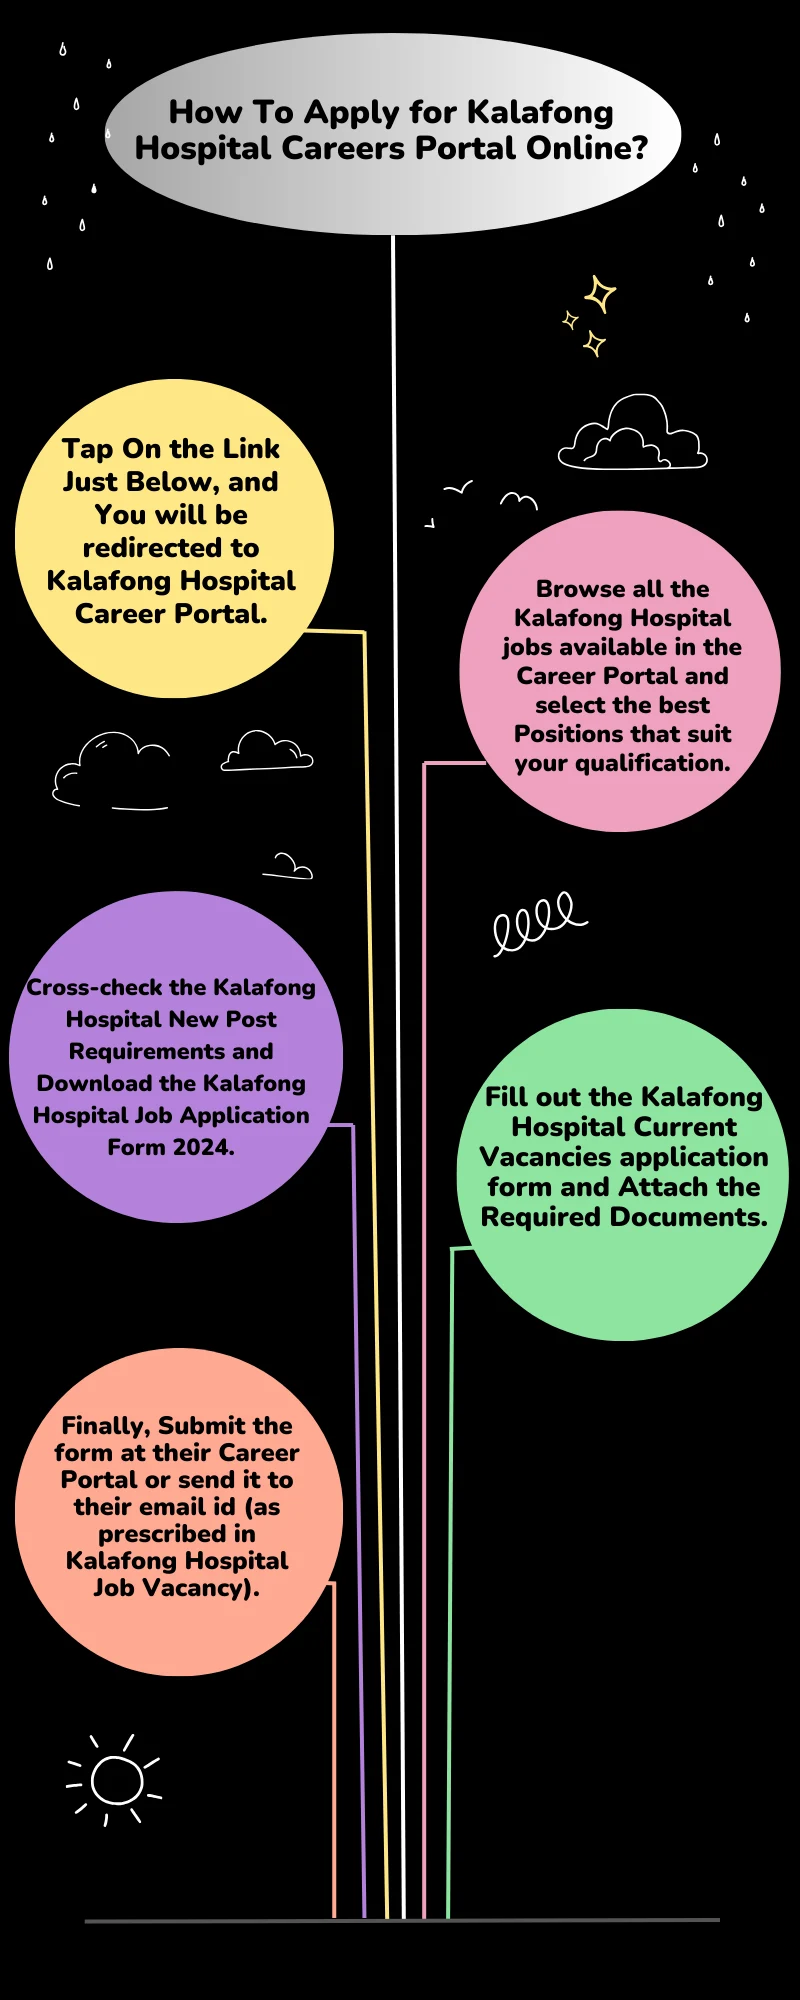 How To Apply for Kalafong Hospital Careers Portal Online?